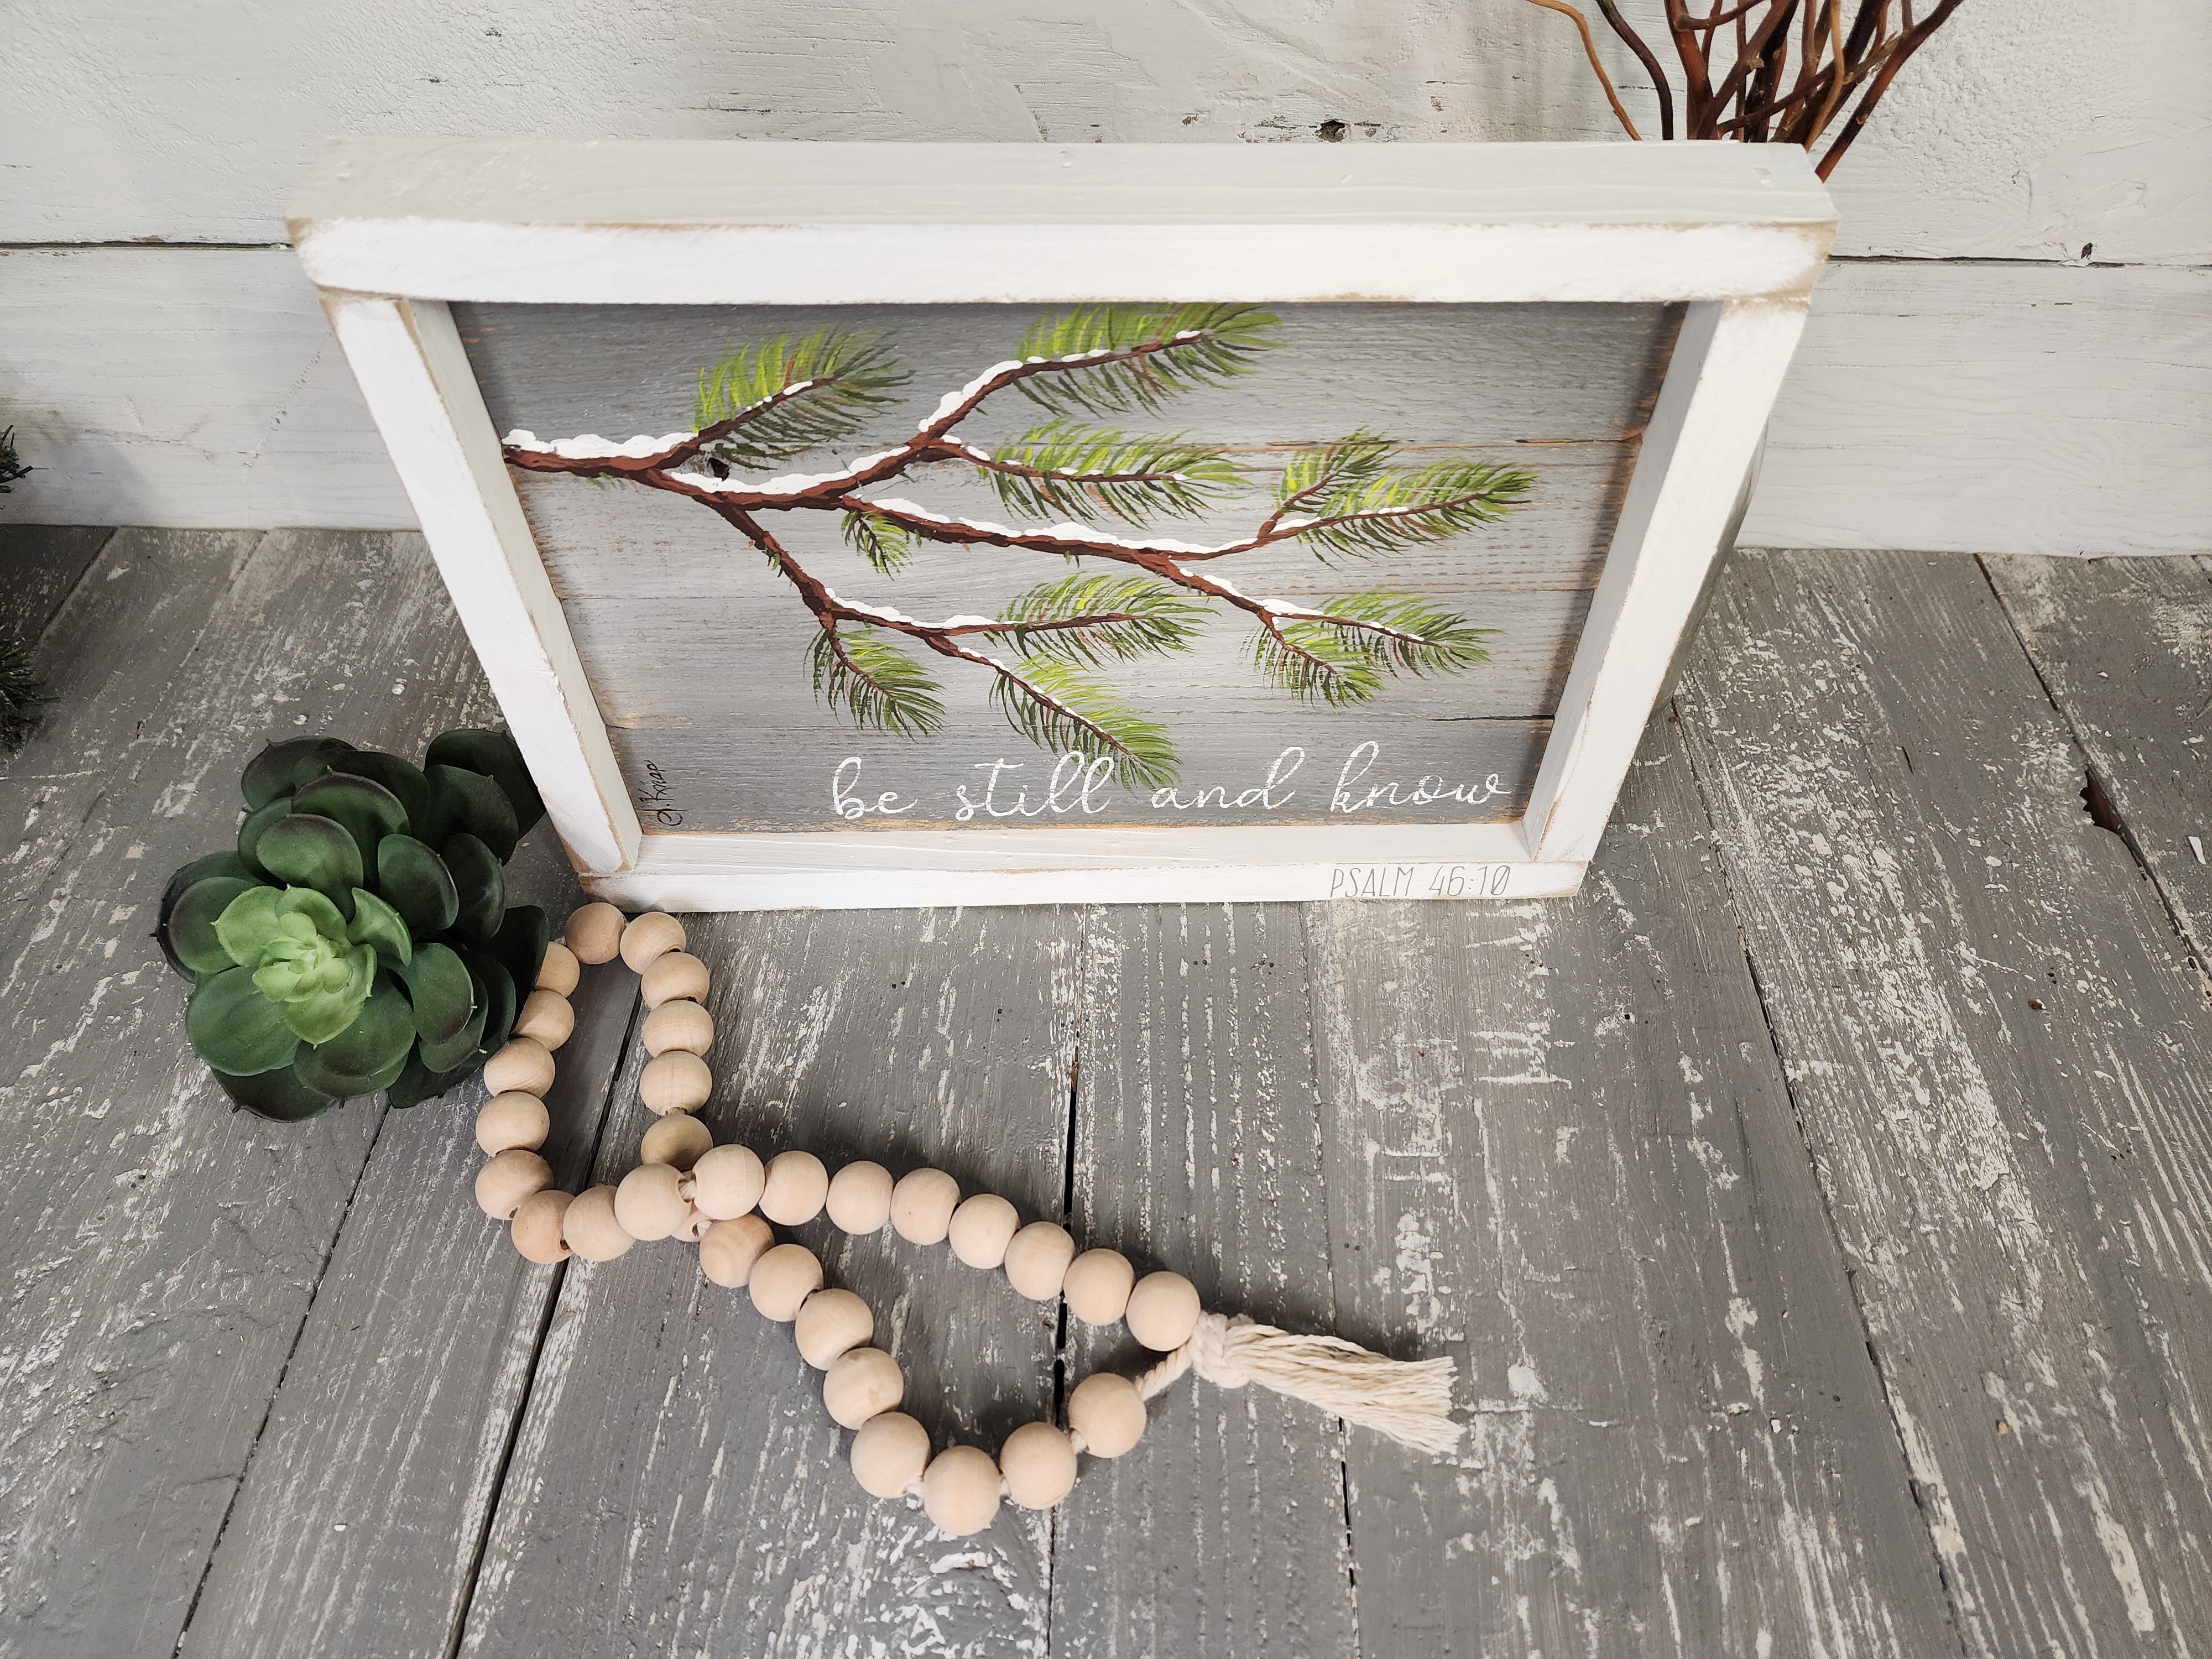 Be still and know, snow on pine branches, framed rustic winter decor painting, desk and kitchen counter decor